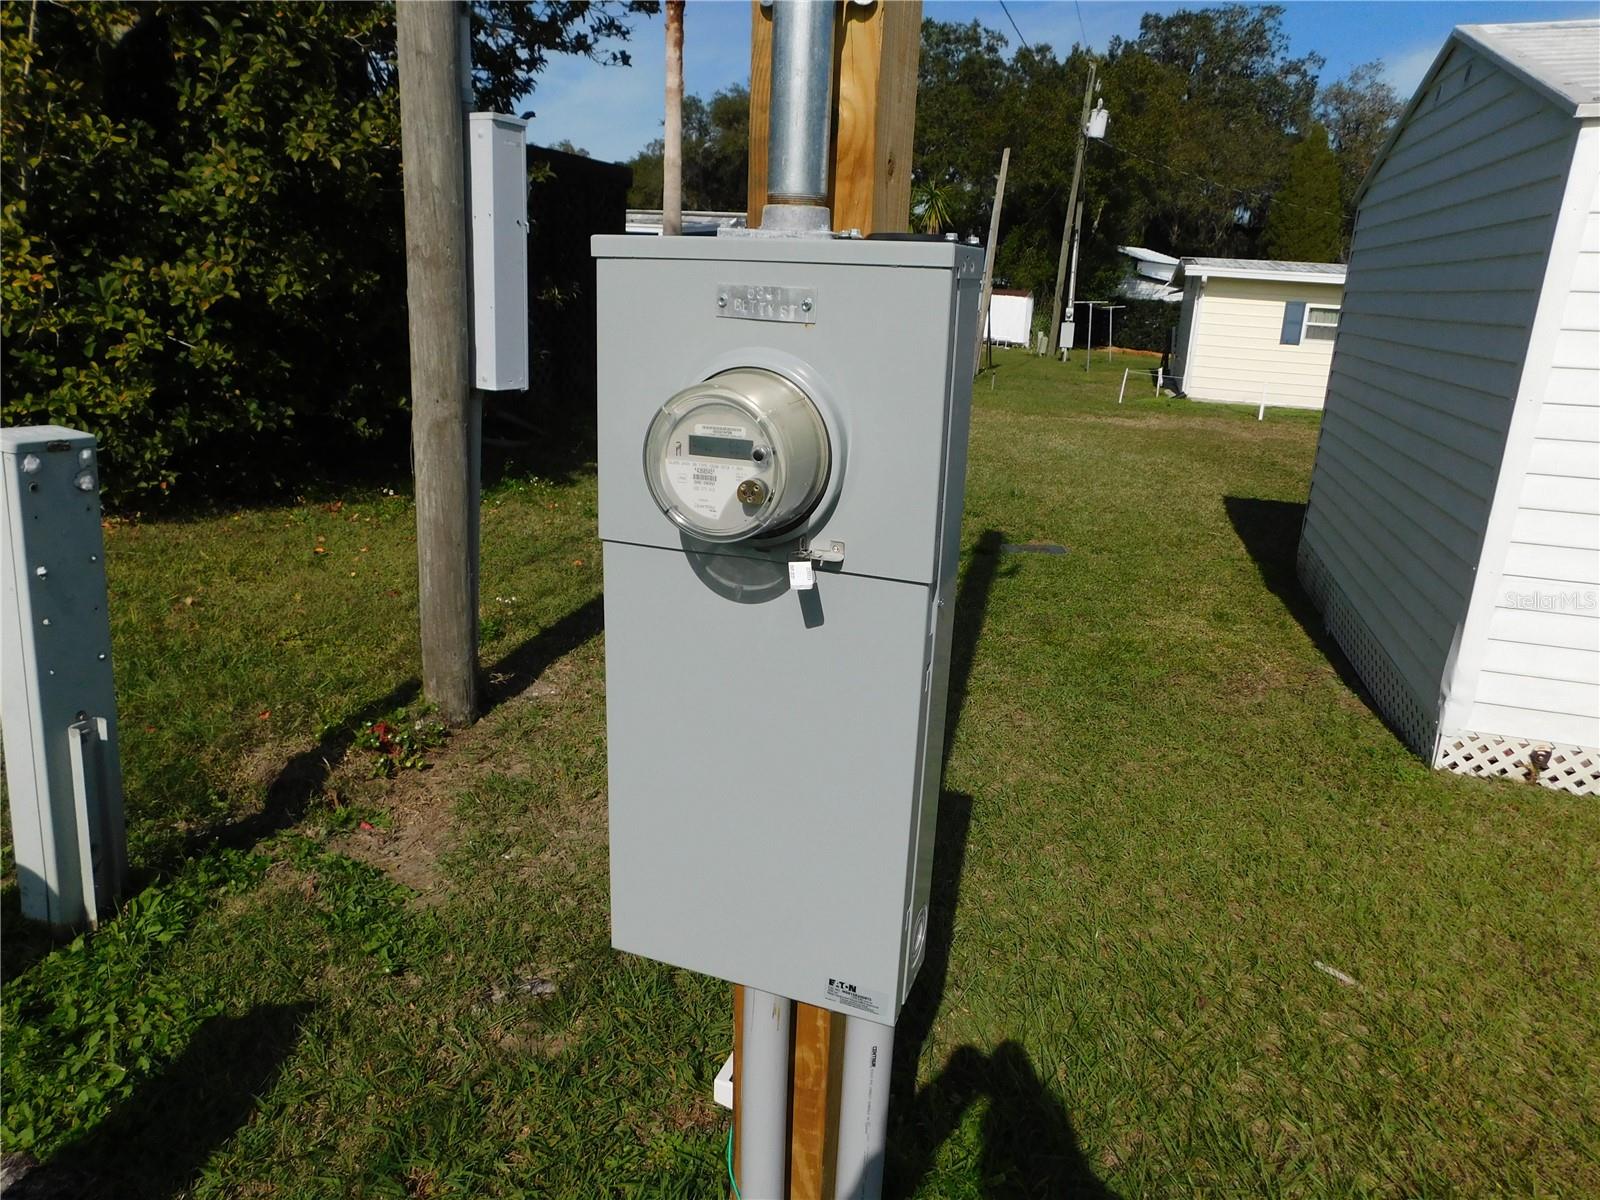 Recently updated outside electrical panel and pole.